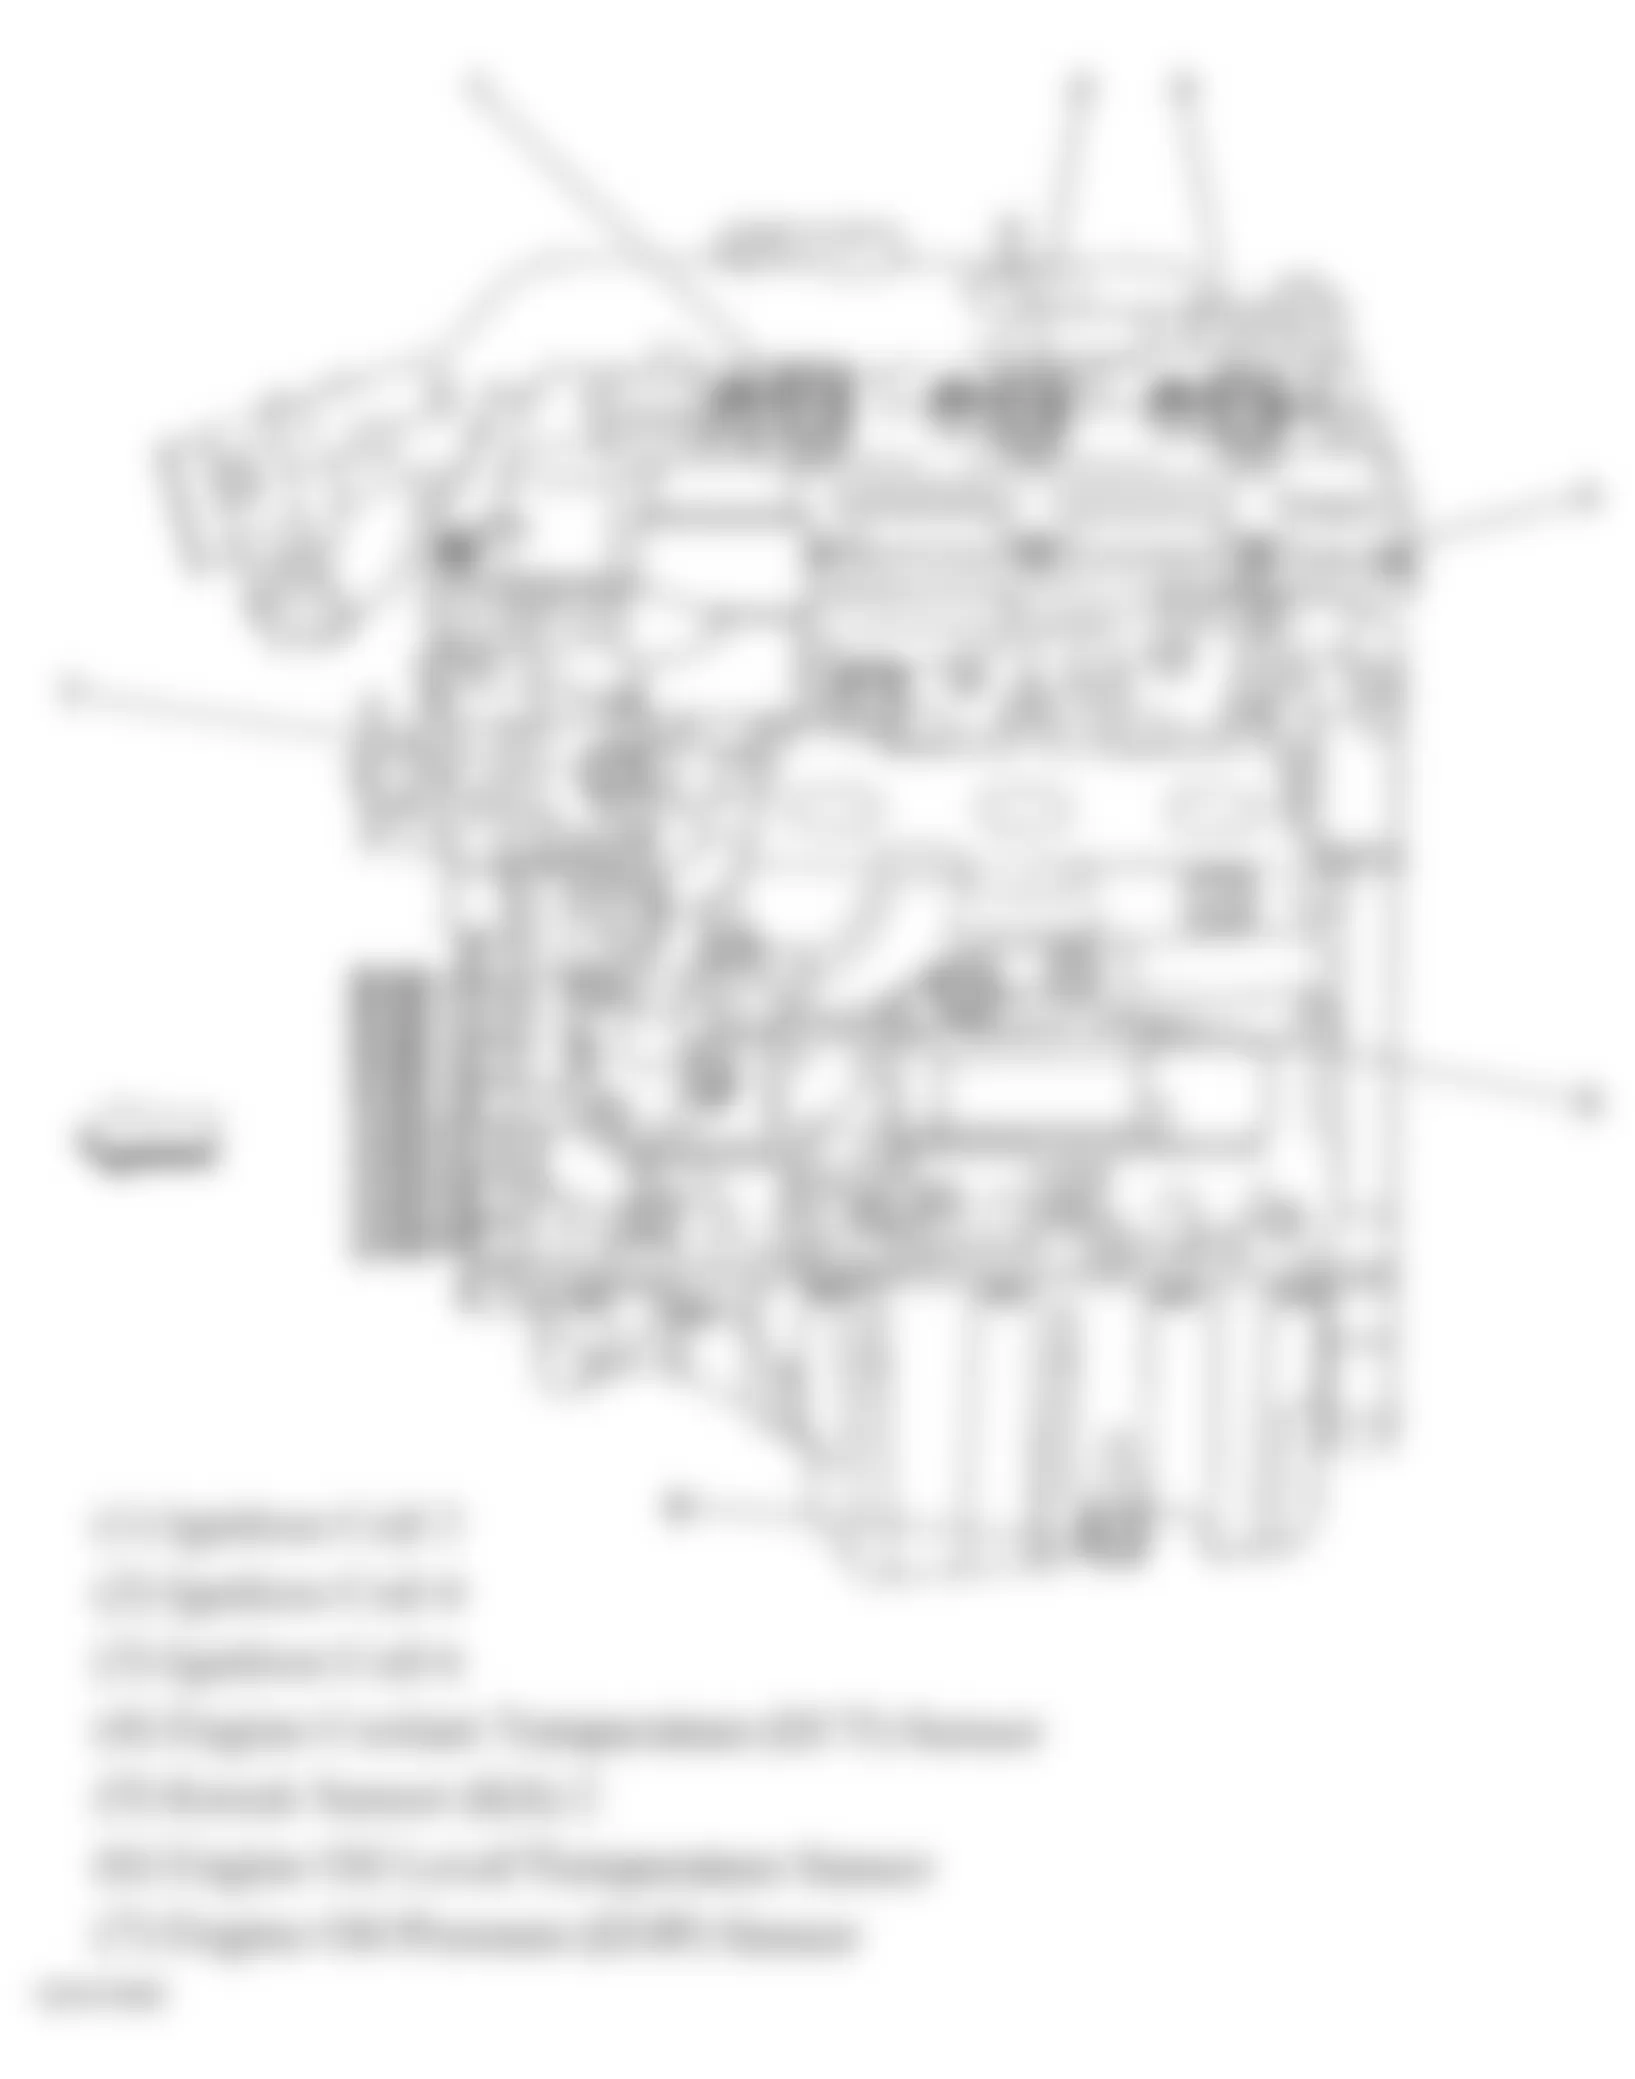 Buick LaCrosse CXS 2008 - Component Locations -  Left Side Of Engine (3.6L)